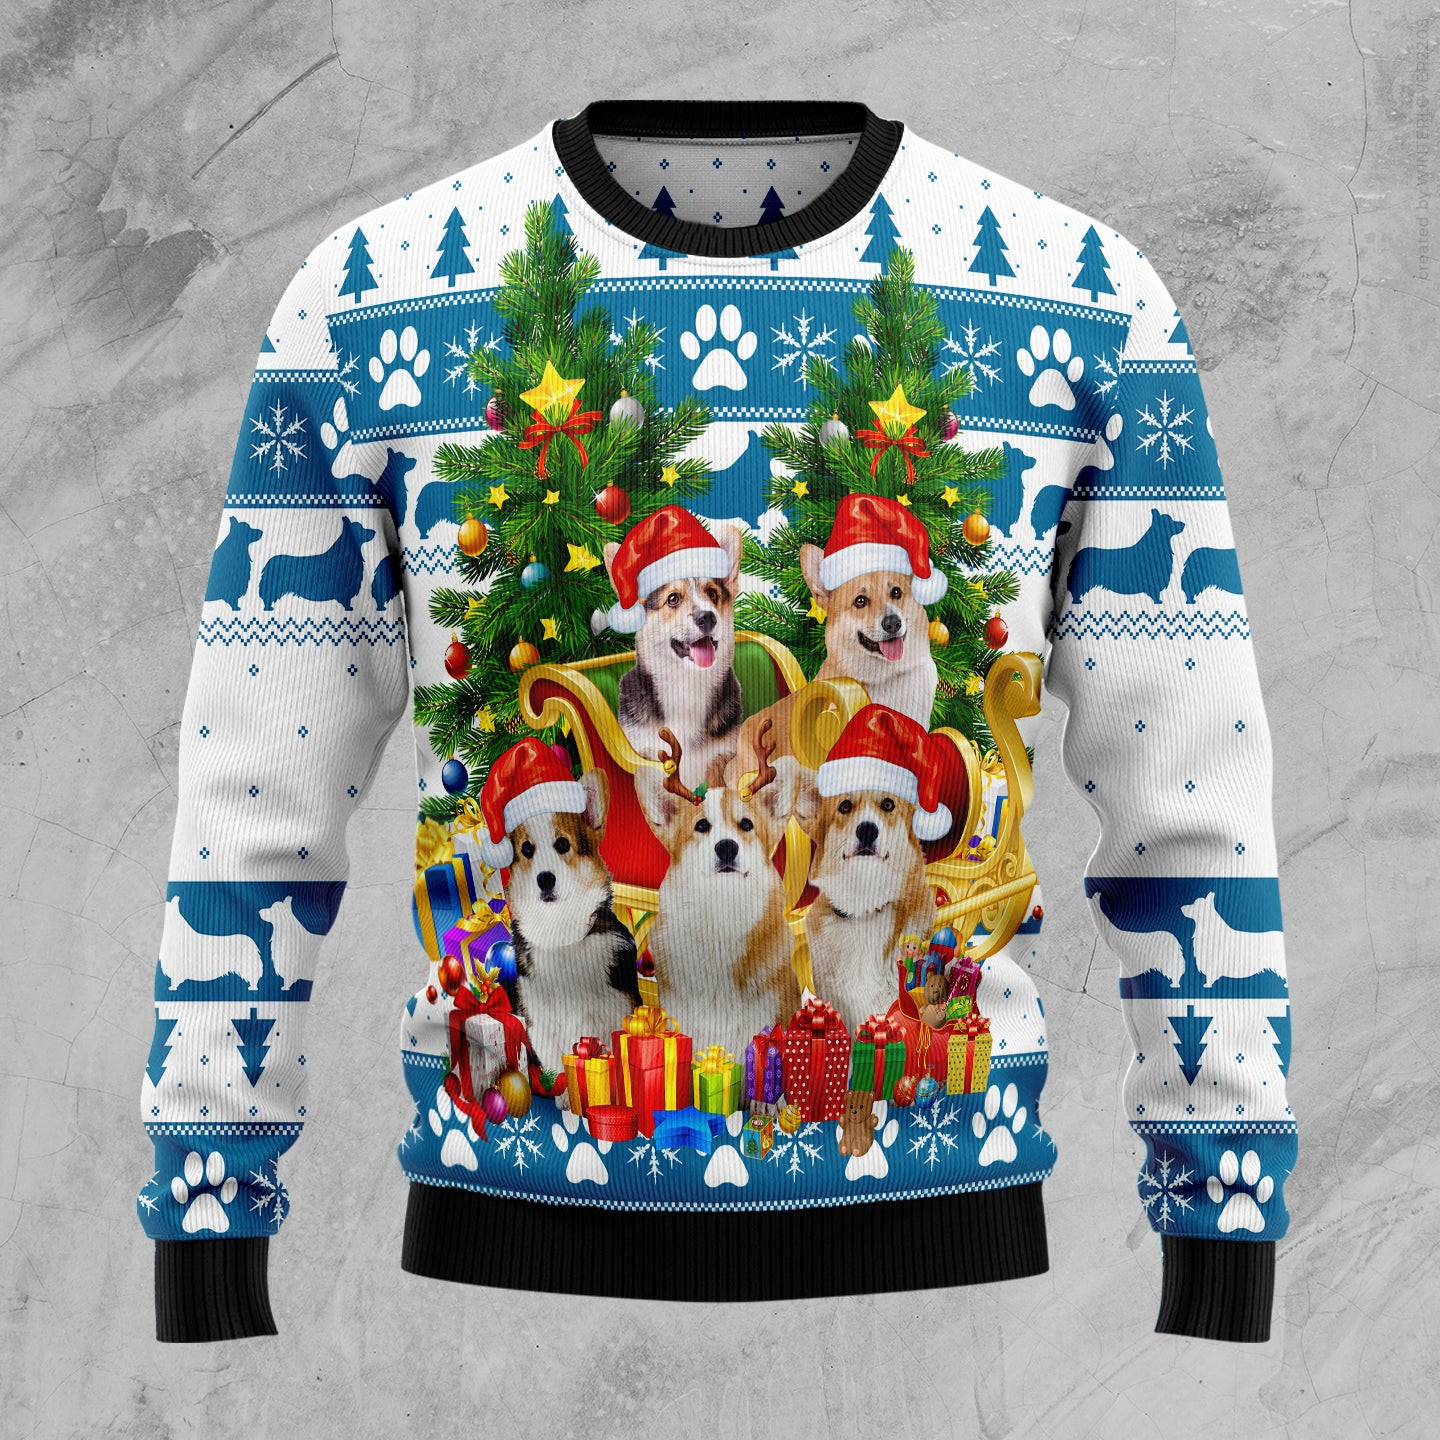 Pembroke Welsh Corgi Greeting Ugly Christmas Sweater, Ugly Sweater For Men Women, Holiday Sweater